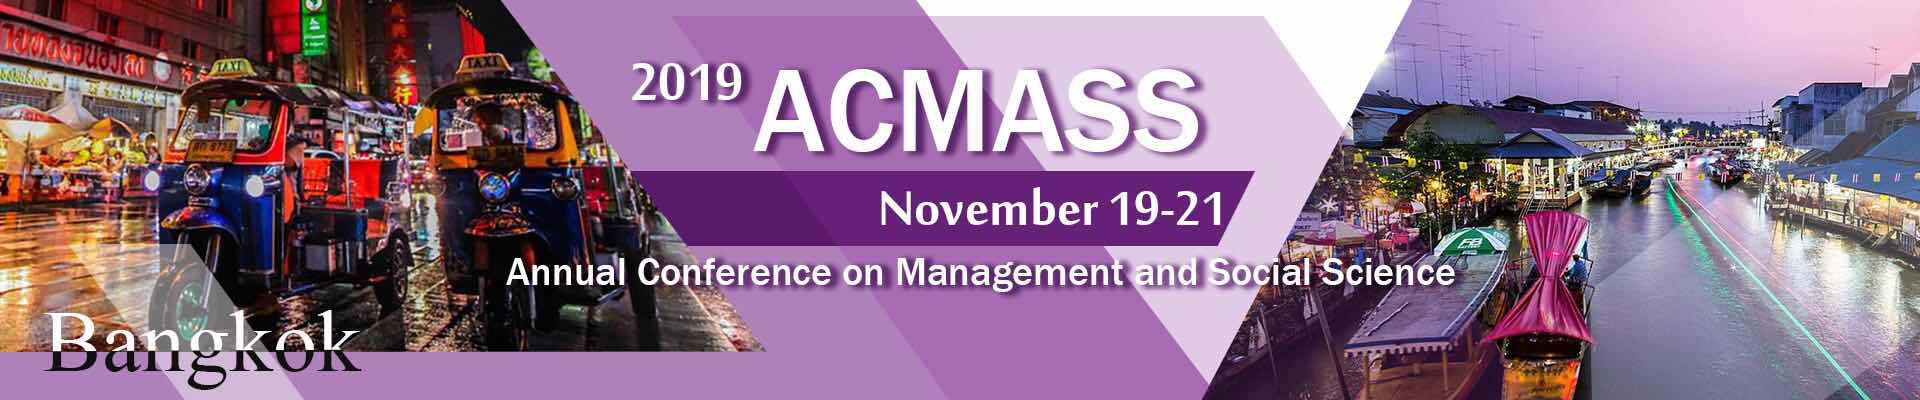 2019 Bangkok ACMASS Annual Conference on Management and Social Science